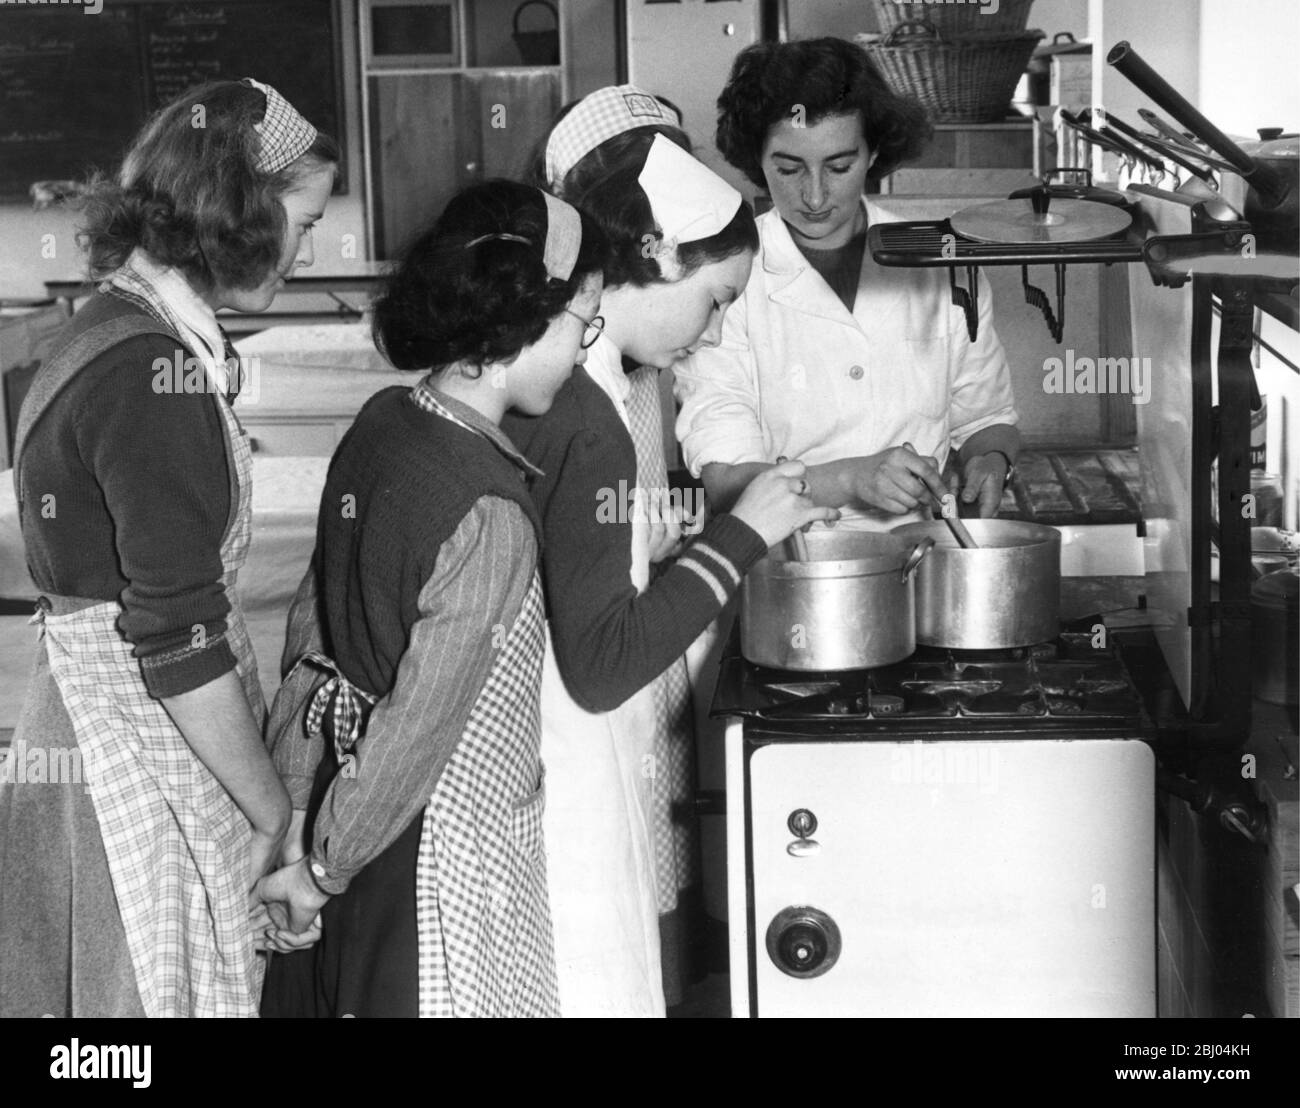 Barclay Secondary Modern School, Stevenage. Miss Cleaver shows the girls the correct way to cook during a Domestic Science lesson. 1949 Stock Photo